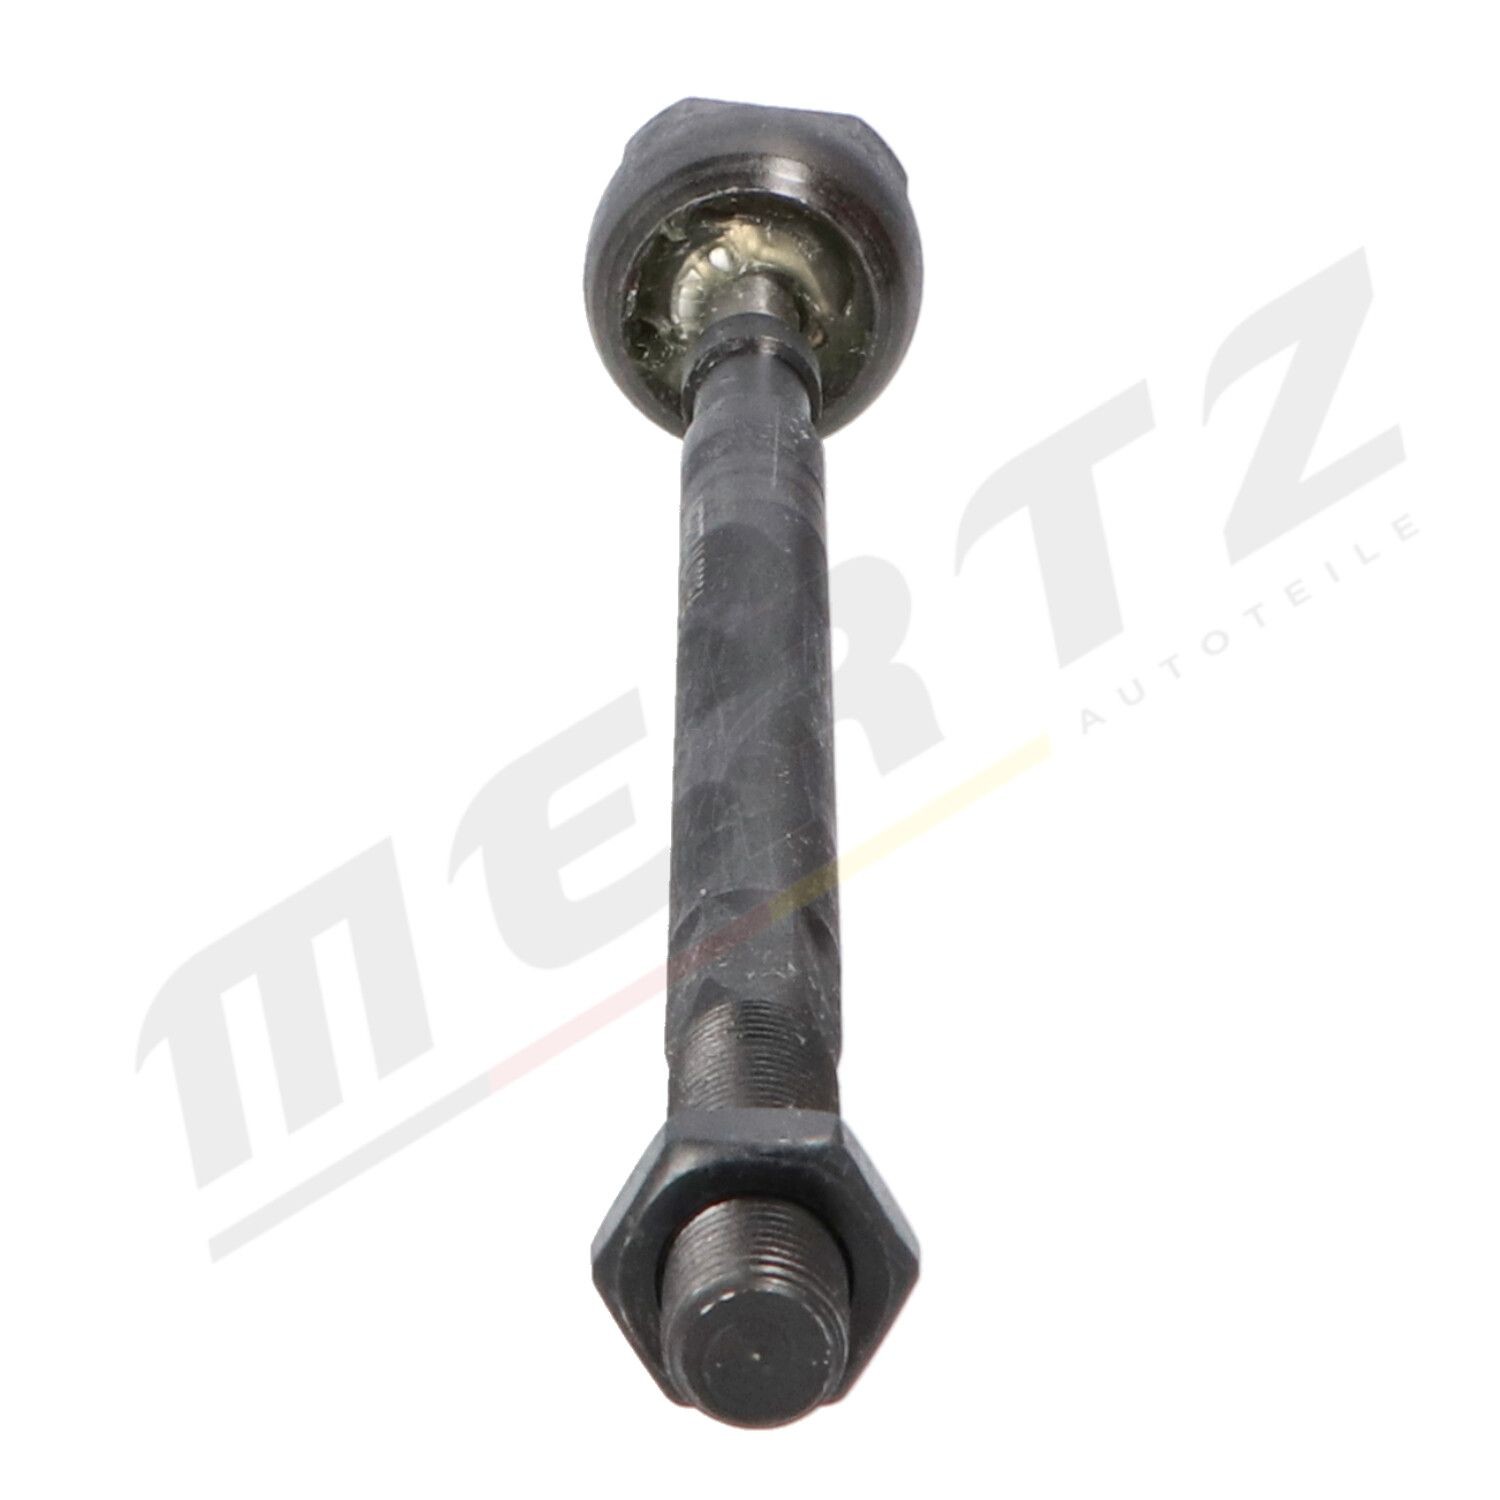 M-S0354 Steering rack end M-S0354 MERTZ Front Axle Left, Front Axle Right, 296 mm